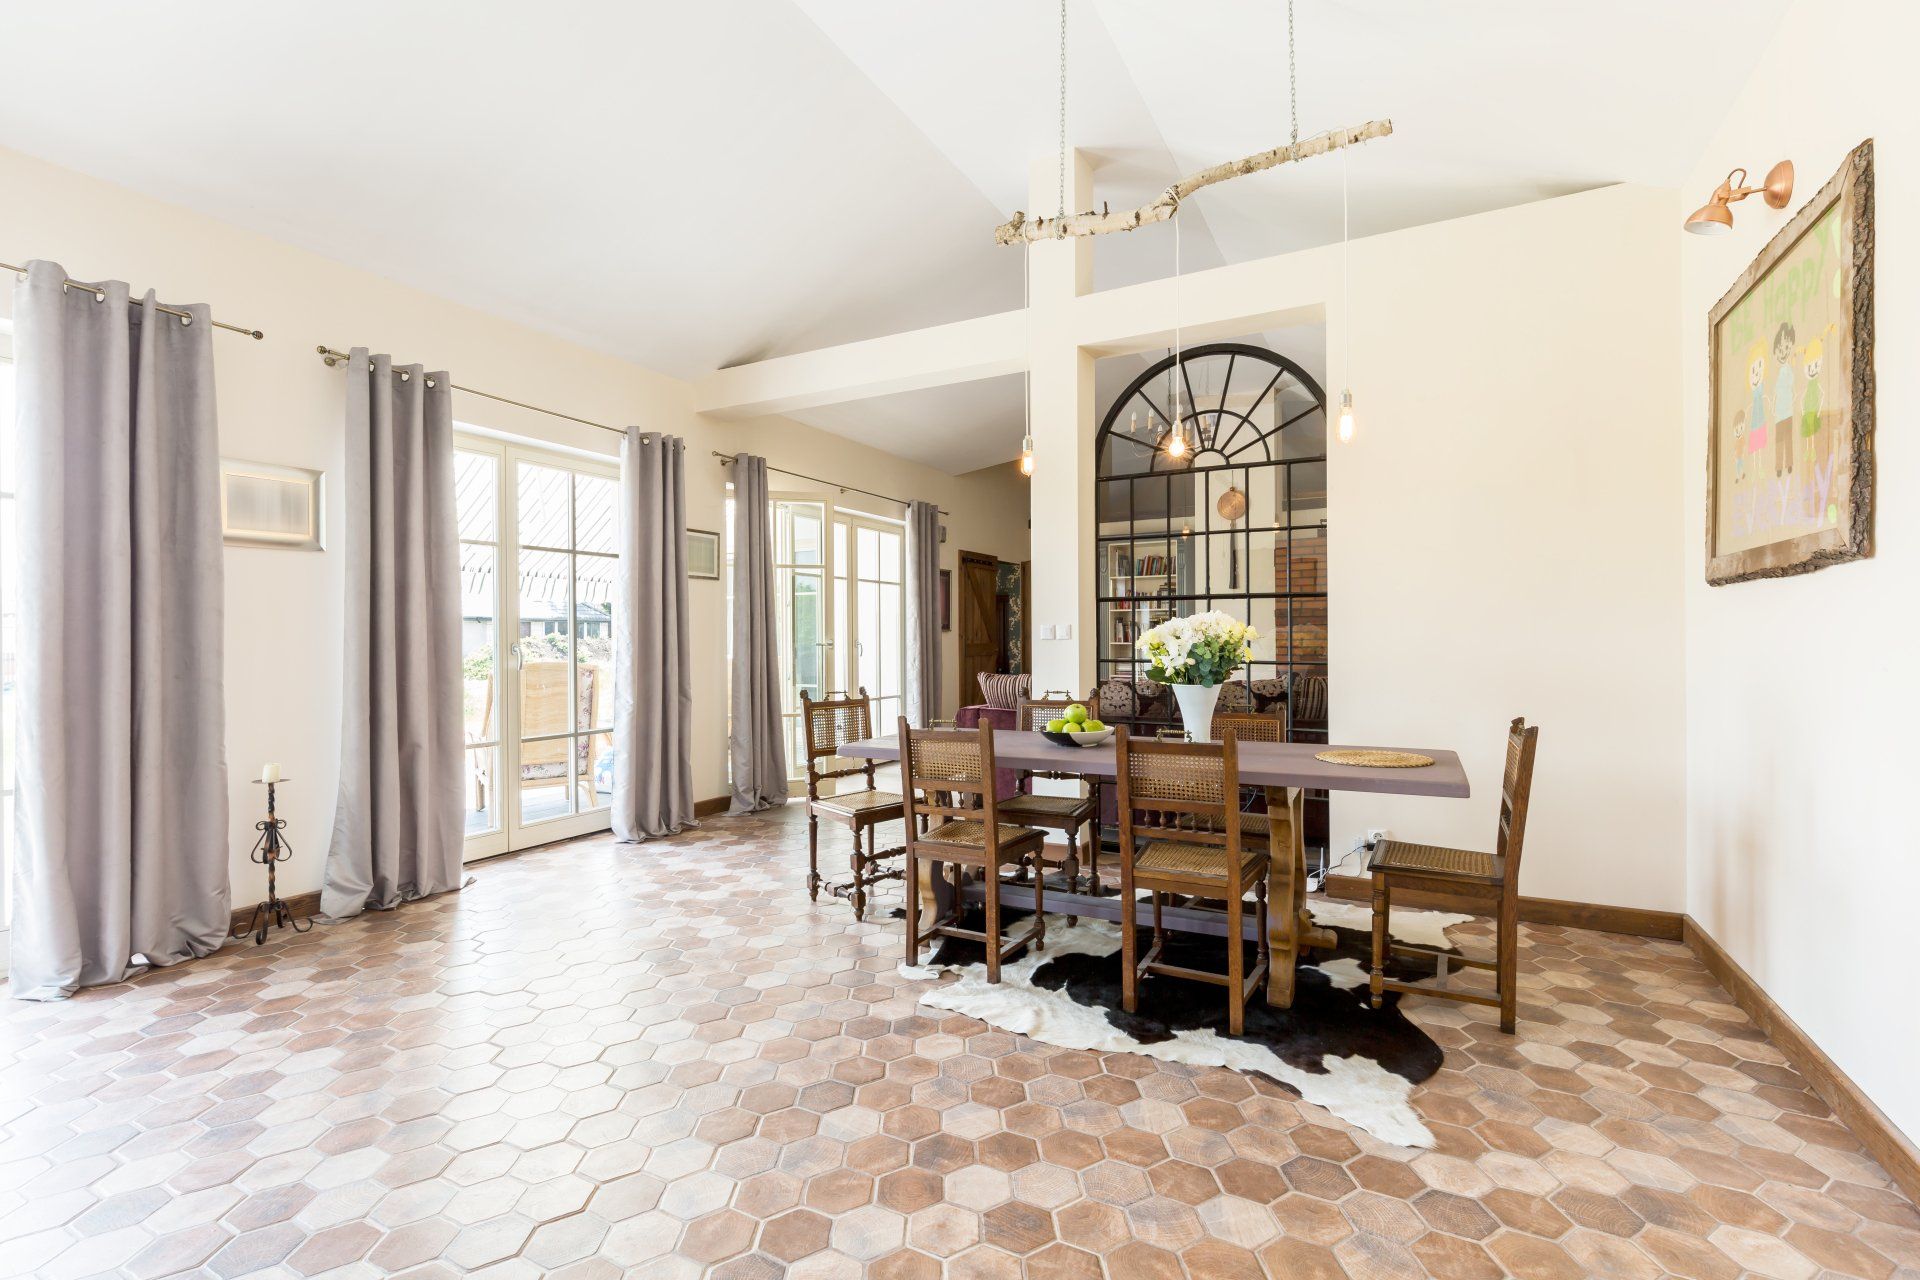 A Guide To Saltillo Tile Restoration, What Flooring Goes With Saltillo Tile